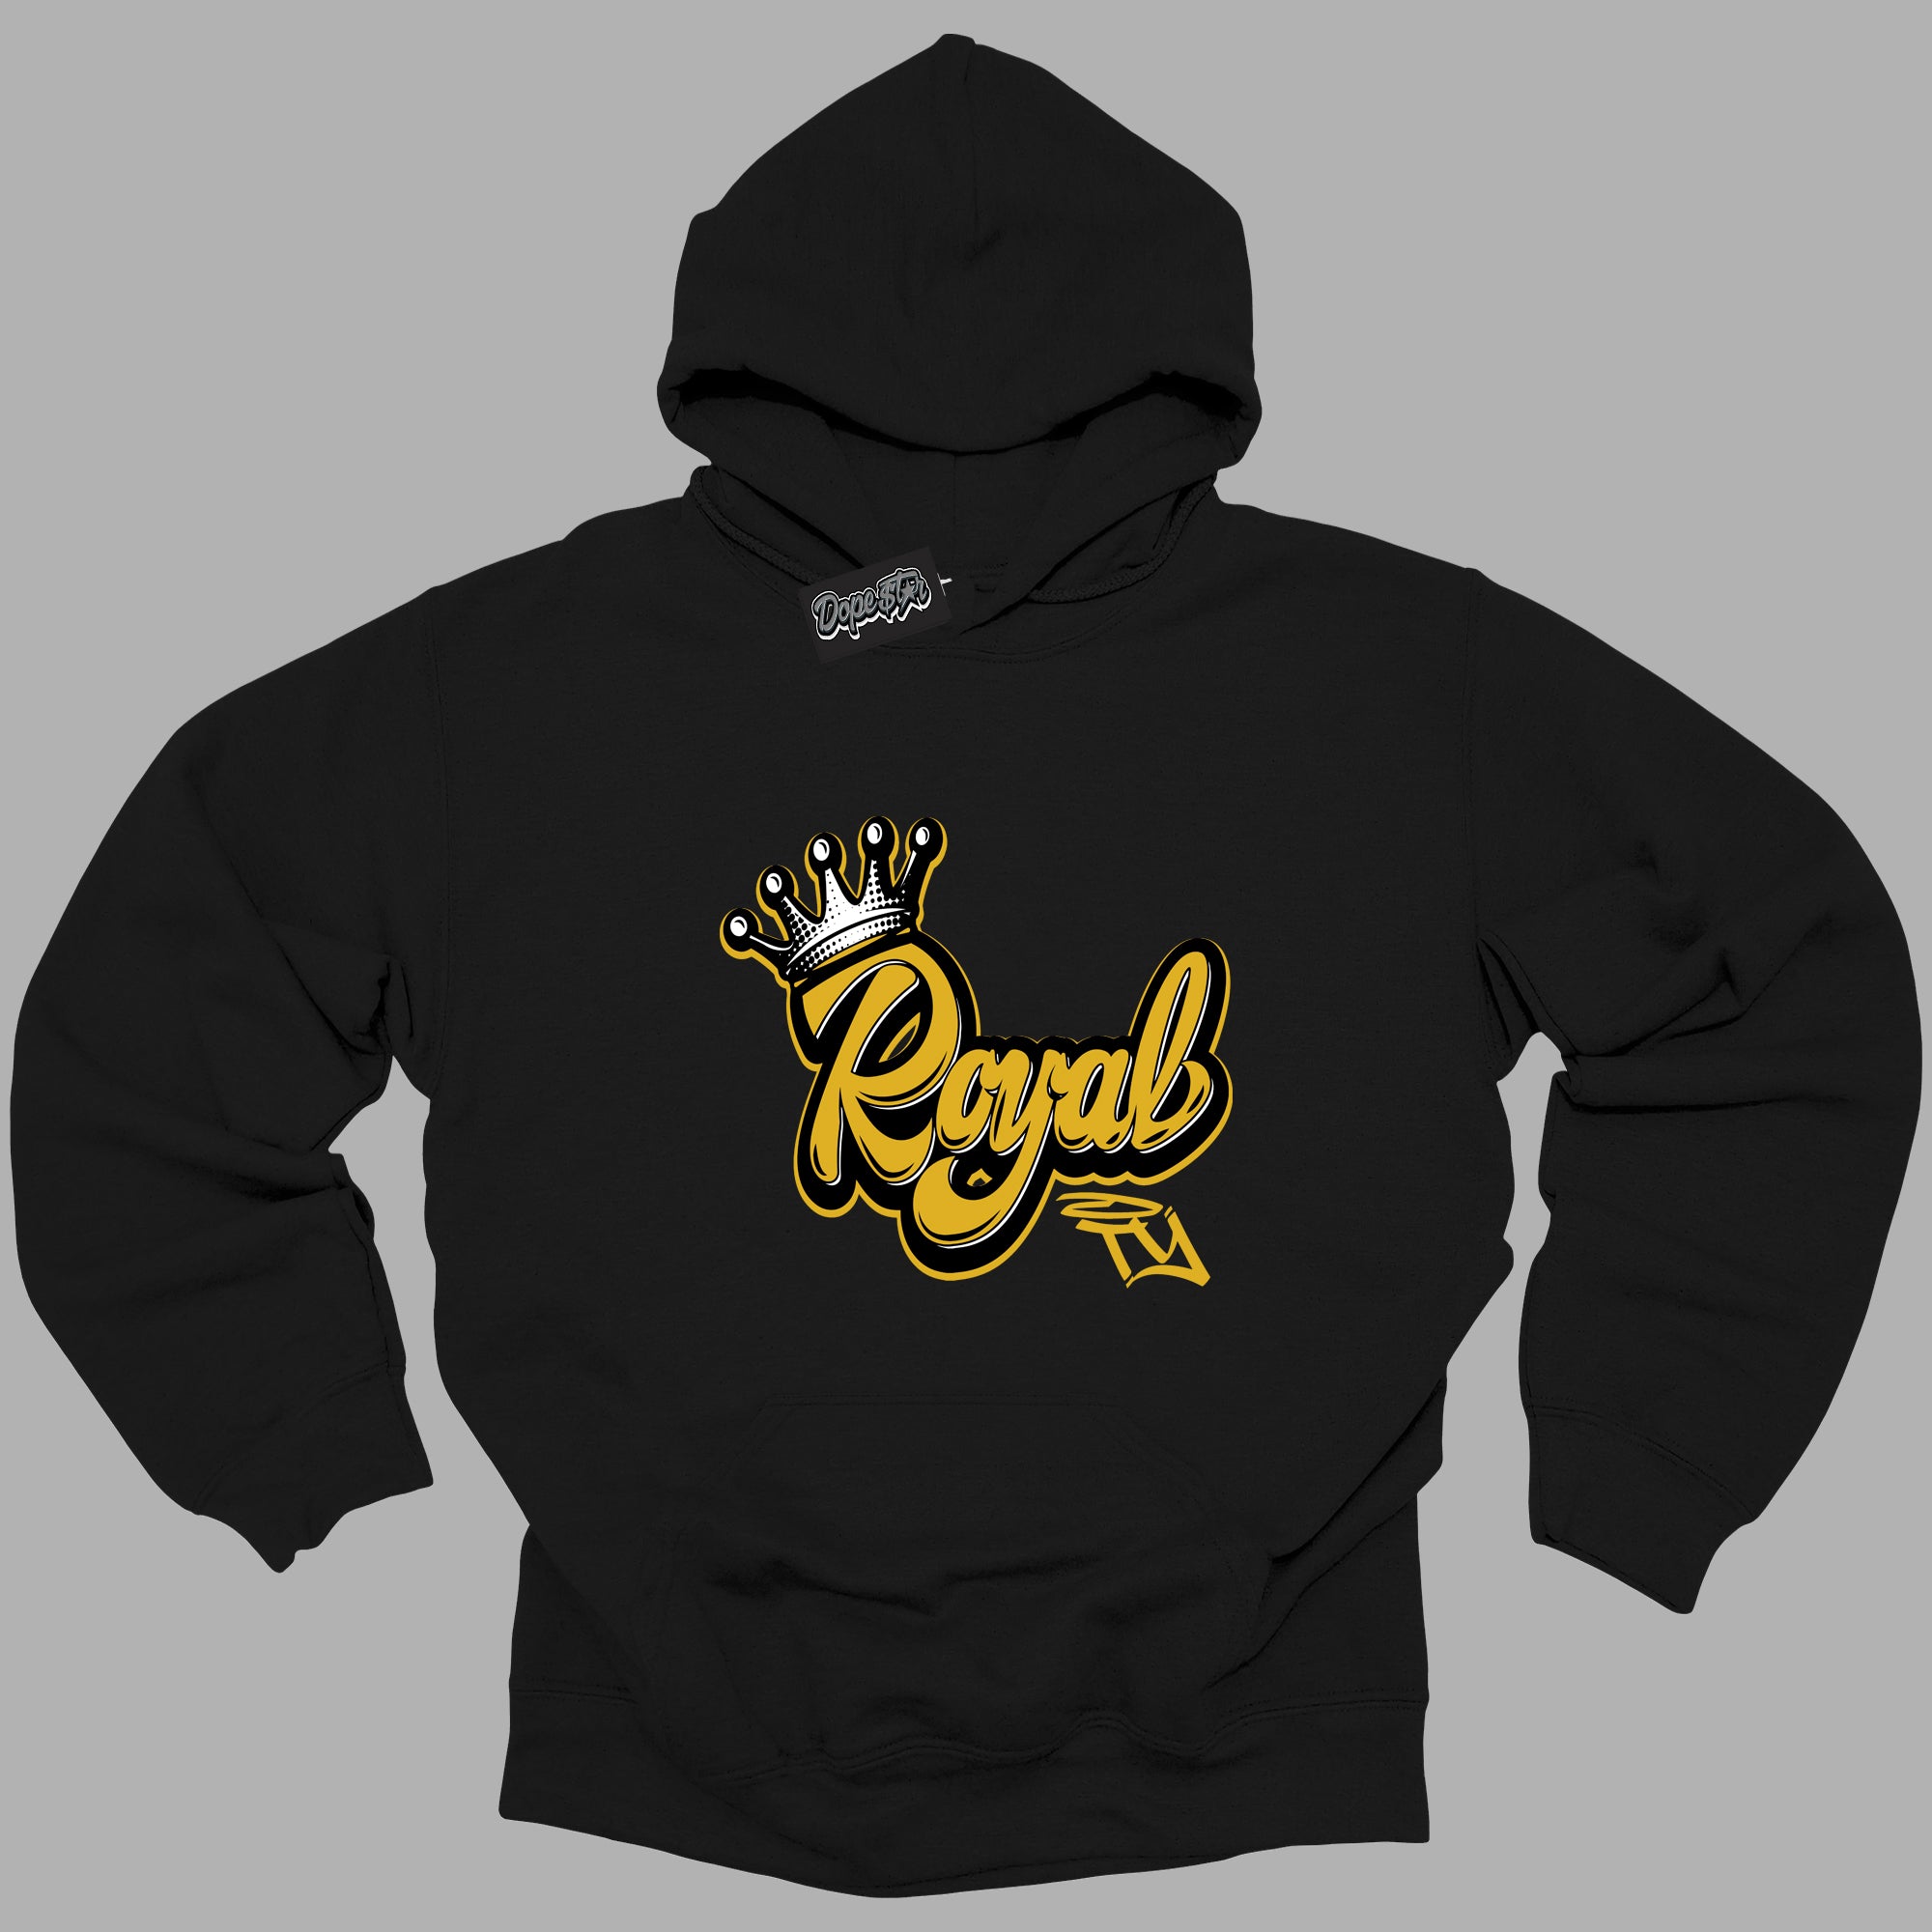 Cool Black Hoodie with “ Royalty ”  design that Perfectly Matches Yellow Ochre 6s Sneakers.